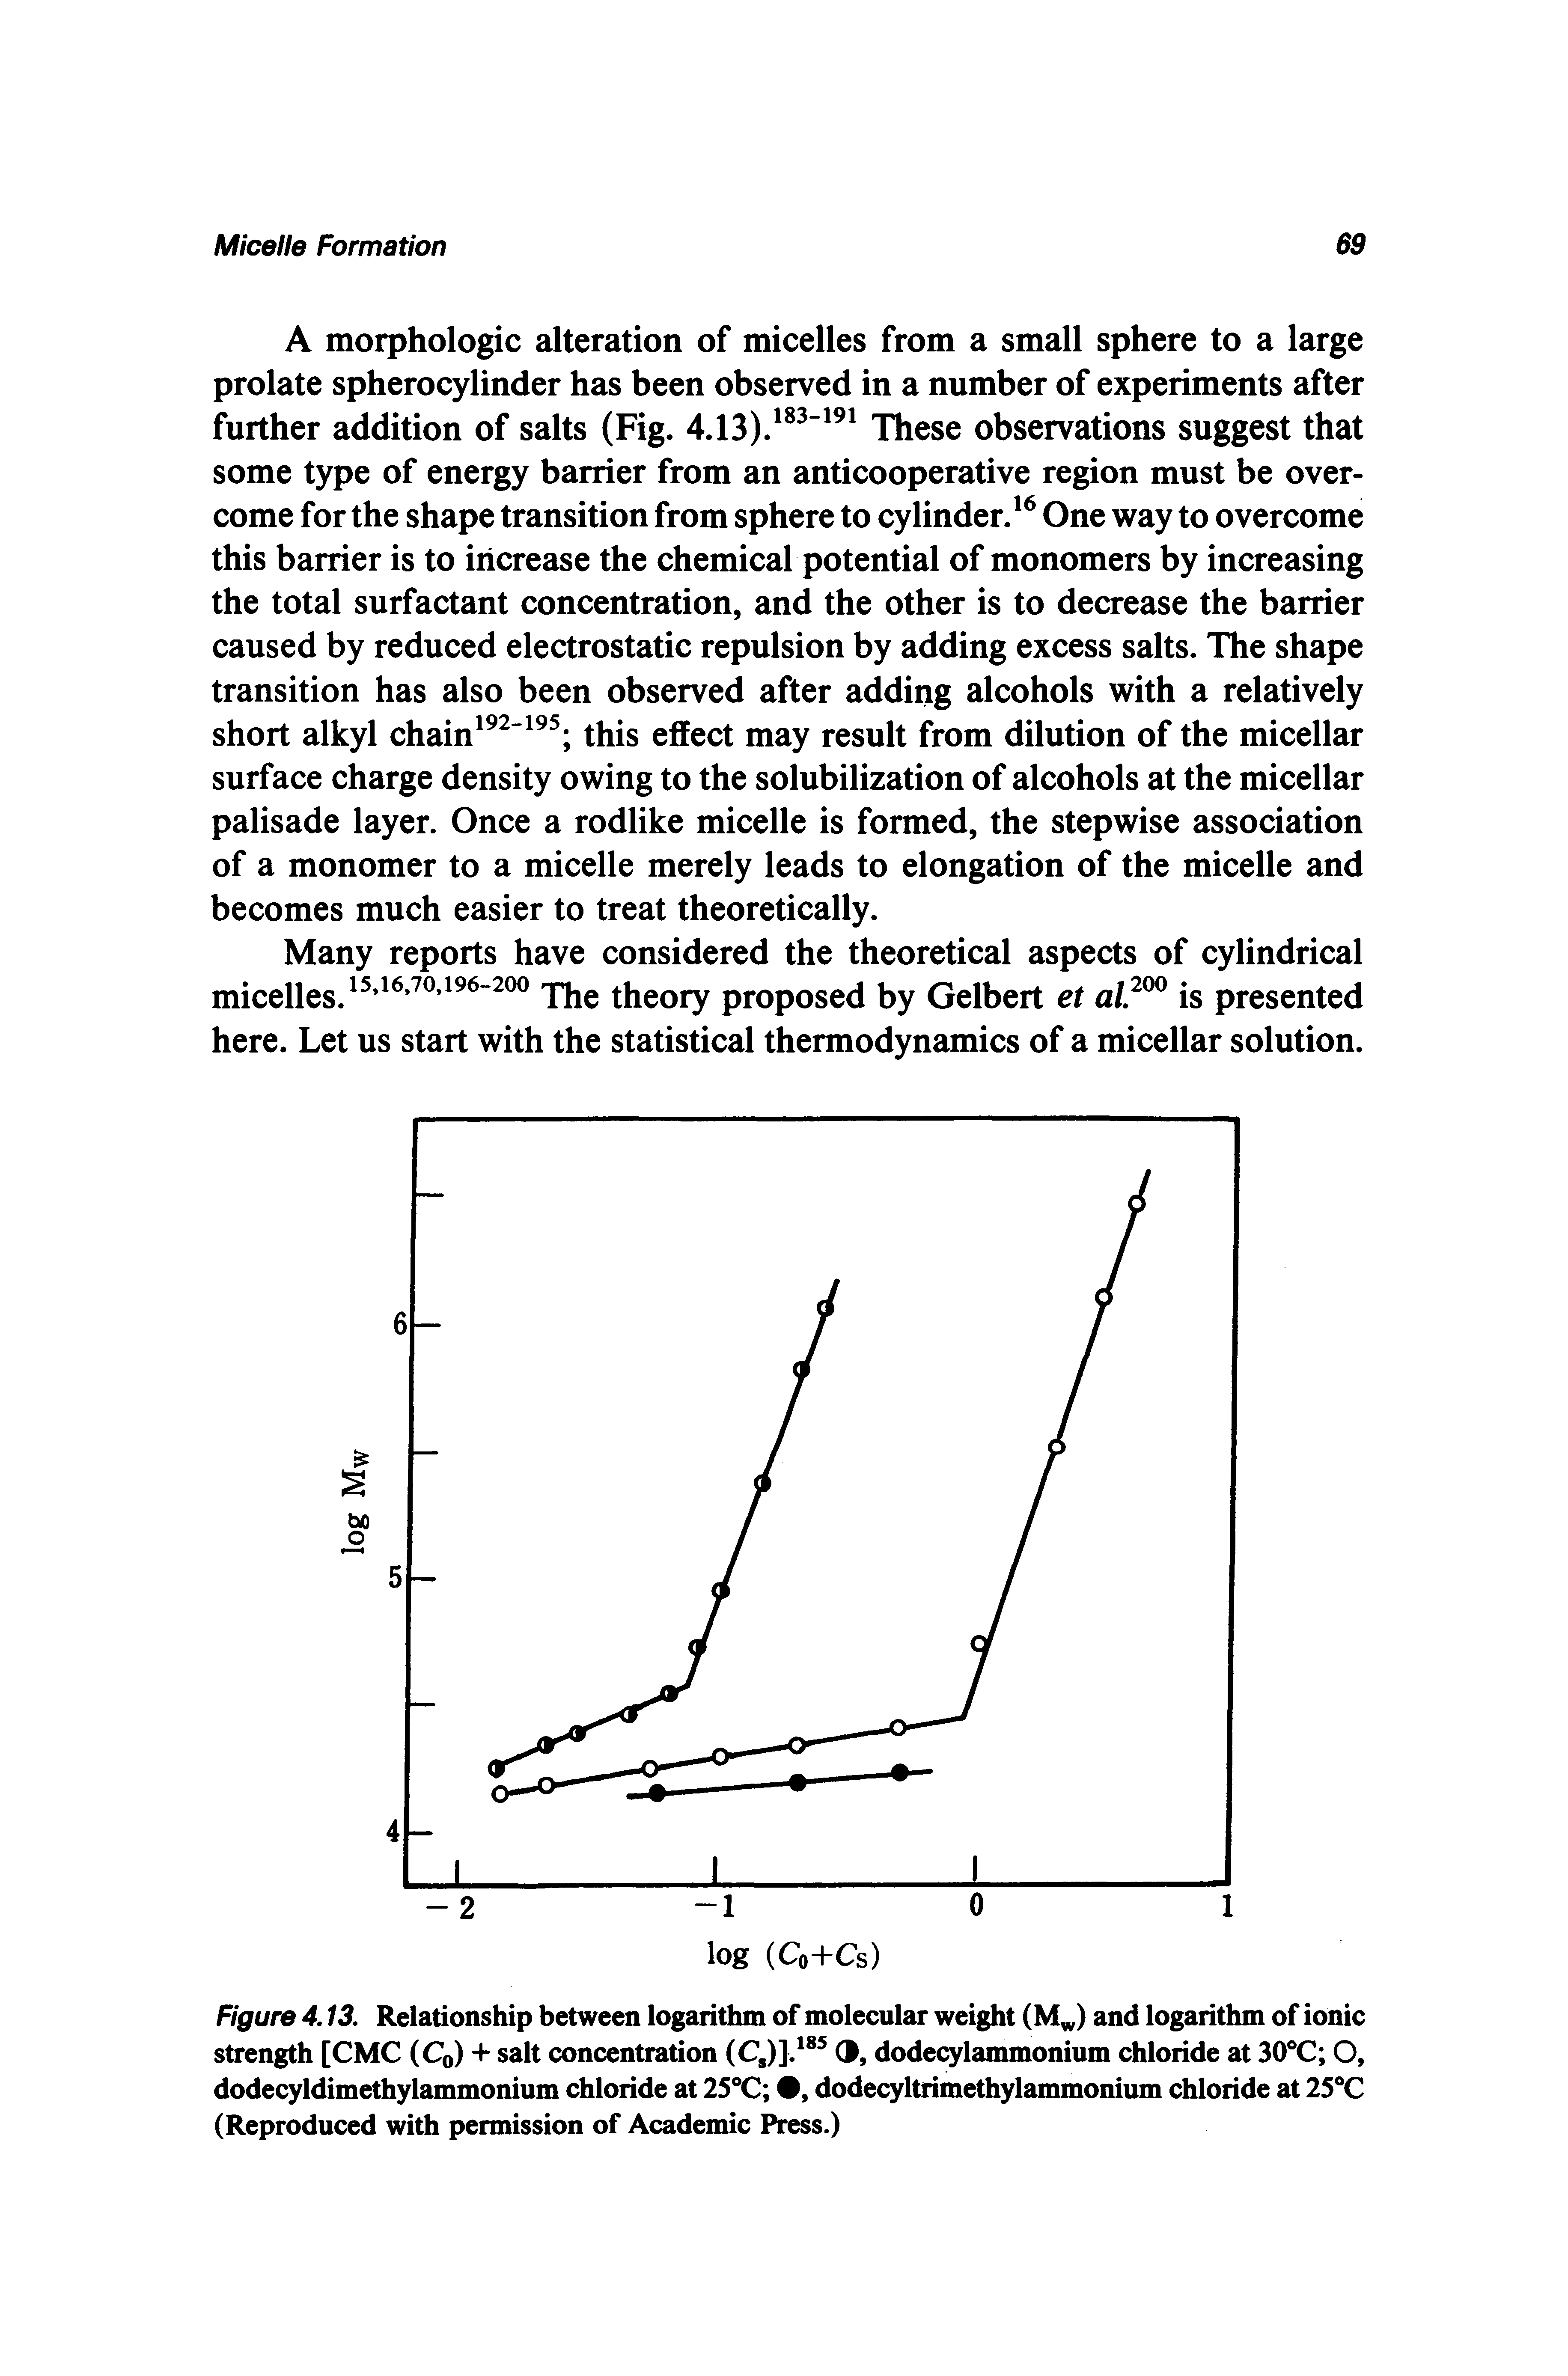 Figure 4.13. Relationship between logarithm of molecular weight (M, ) and logarithm of ionic strength [CMC (Cq) + salt concentration (Cg)]. 3, dodecylammonium chloride at 30 C O, dodecyldimethylammonium chloride at 25X , dodecyltrimethylammonium chloride at IS C (Reproduced with permission of Academic Press.)...